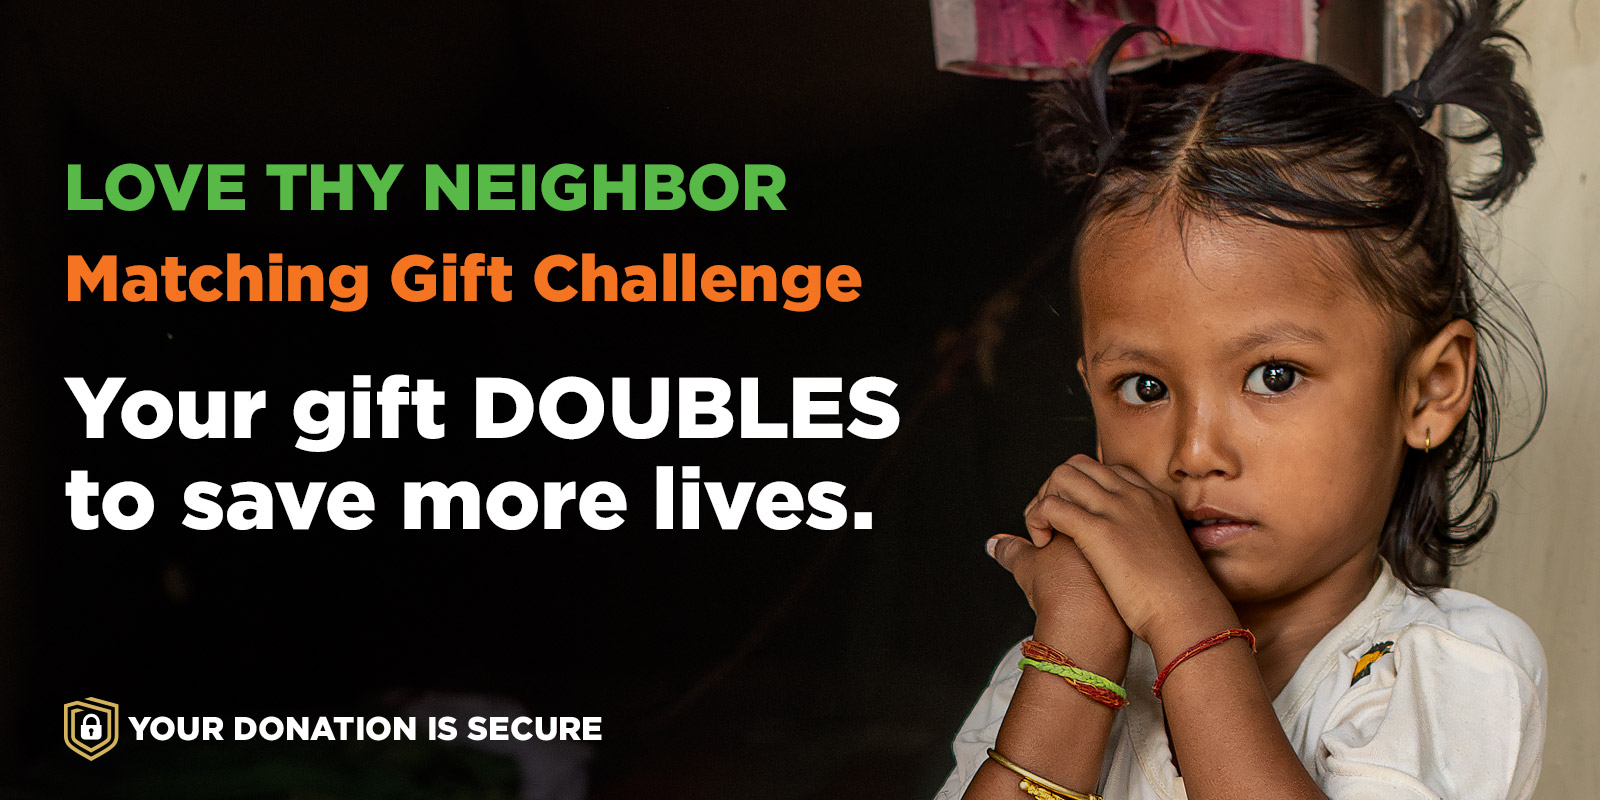 Your gift DOUBLES to save more lives.